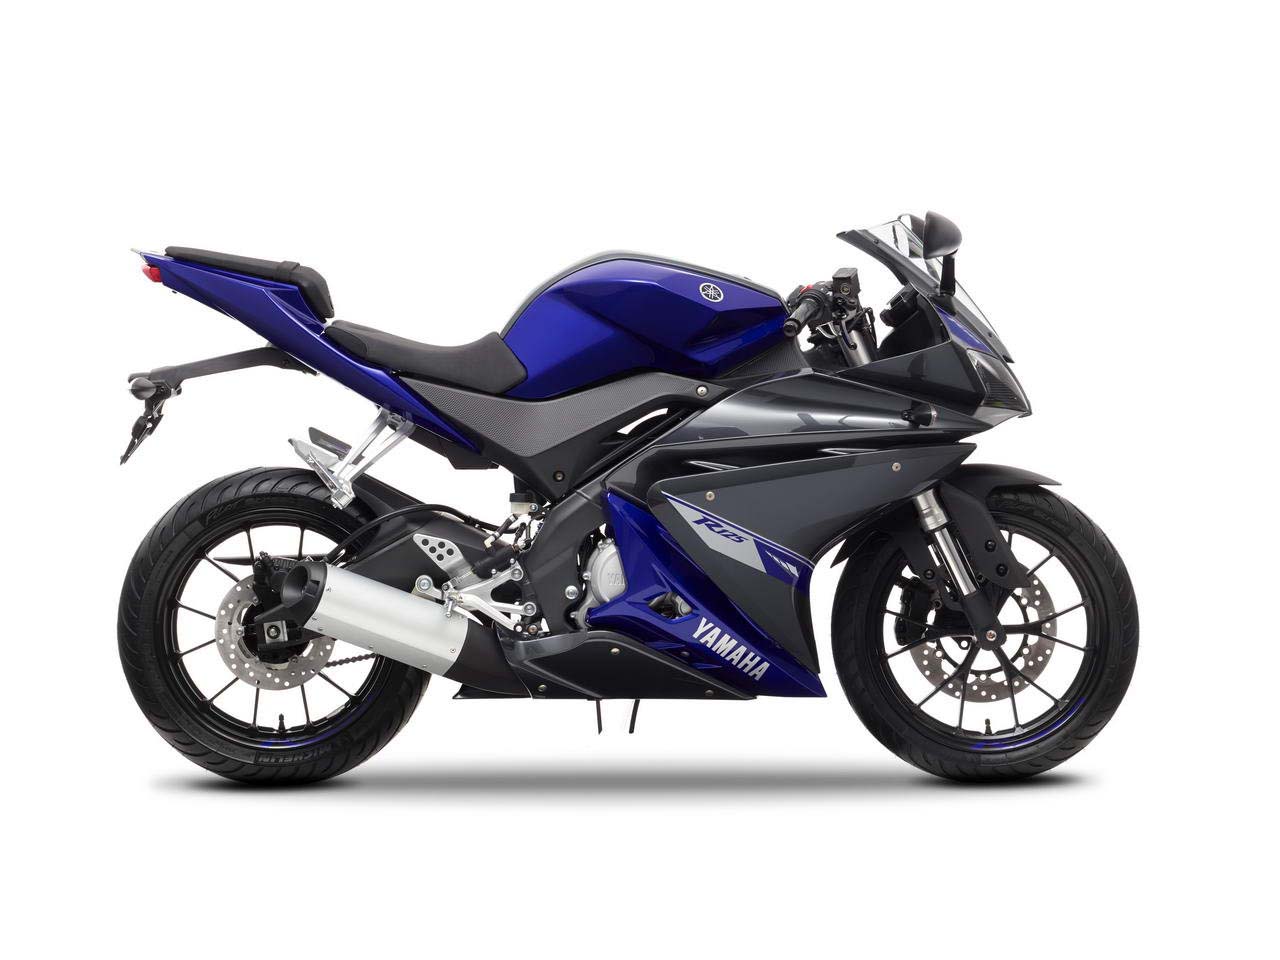 The 2014 Yamaha YZFR125 should retail in April for €4,490  and 